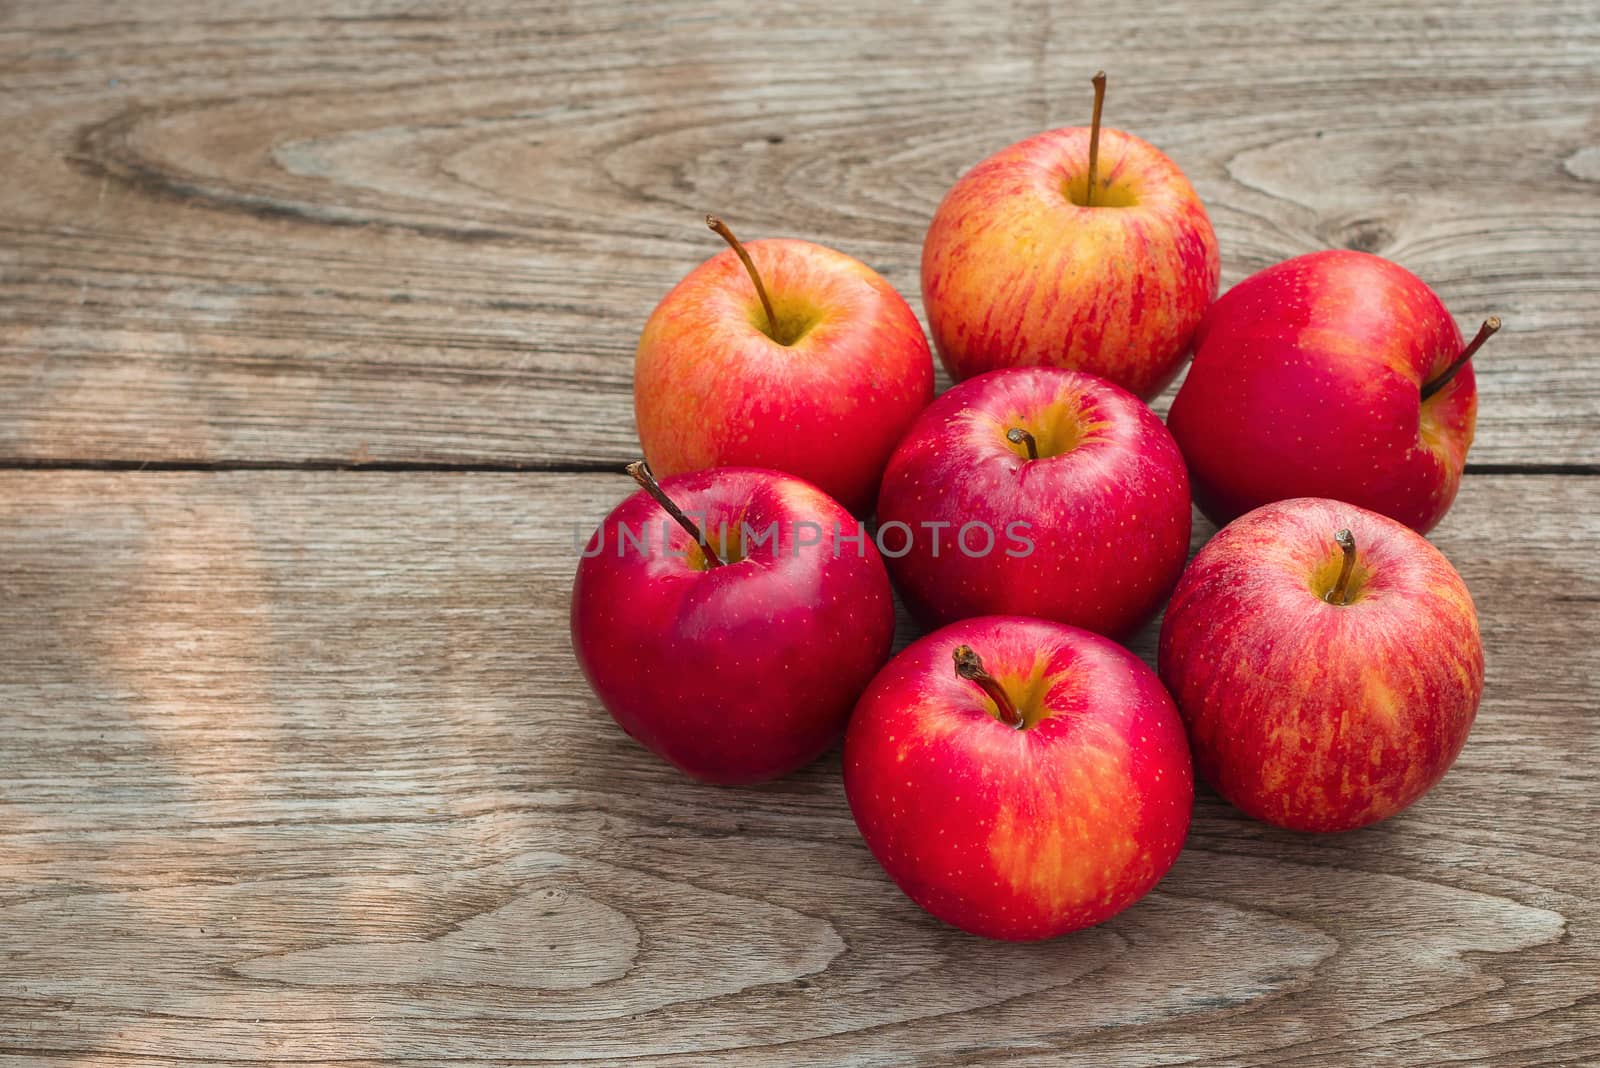 Red apples on a wooden table background.